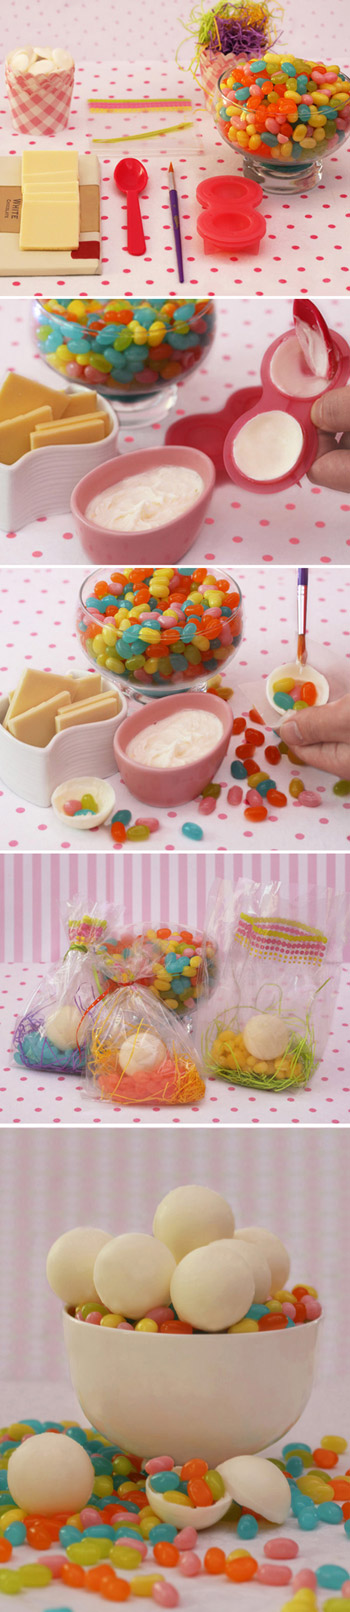 White Chocolate Jelly Belly Surprise Balls Tutorial